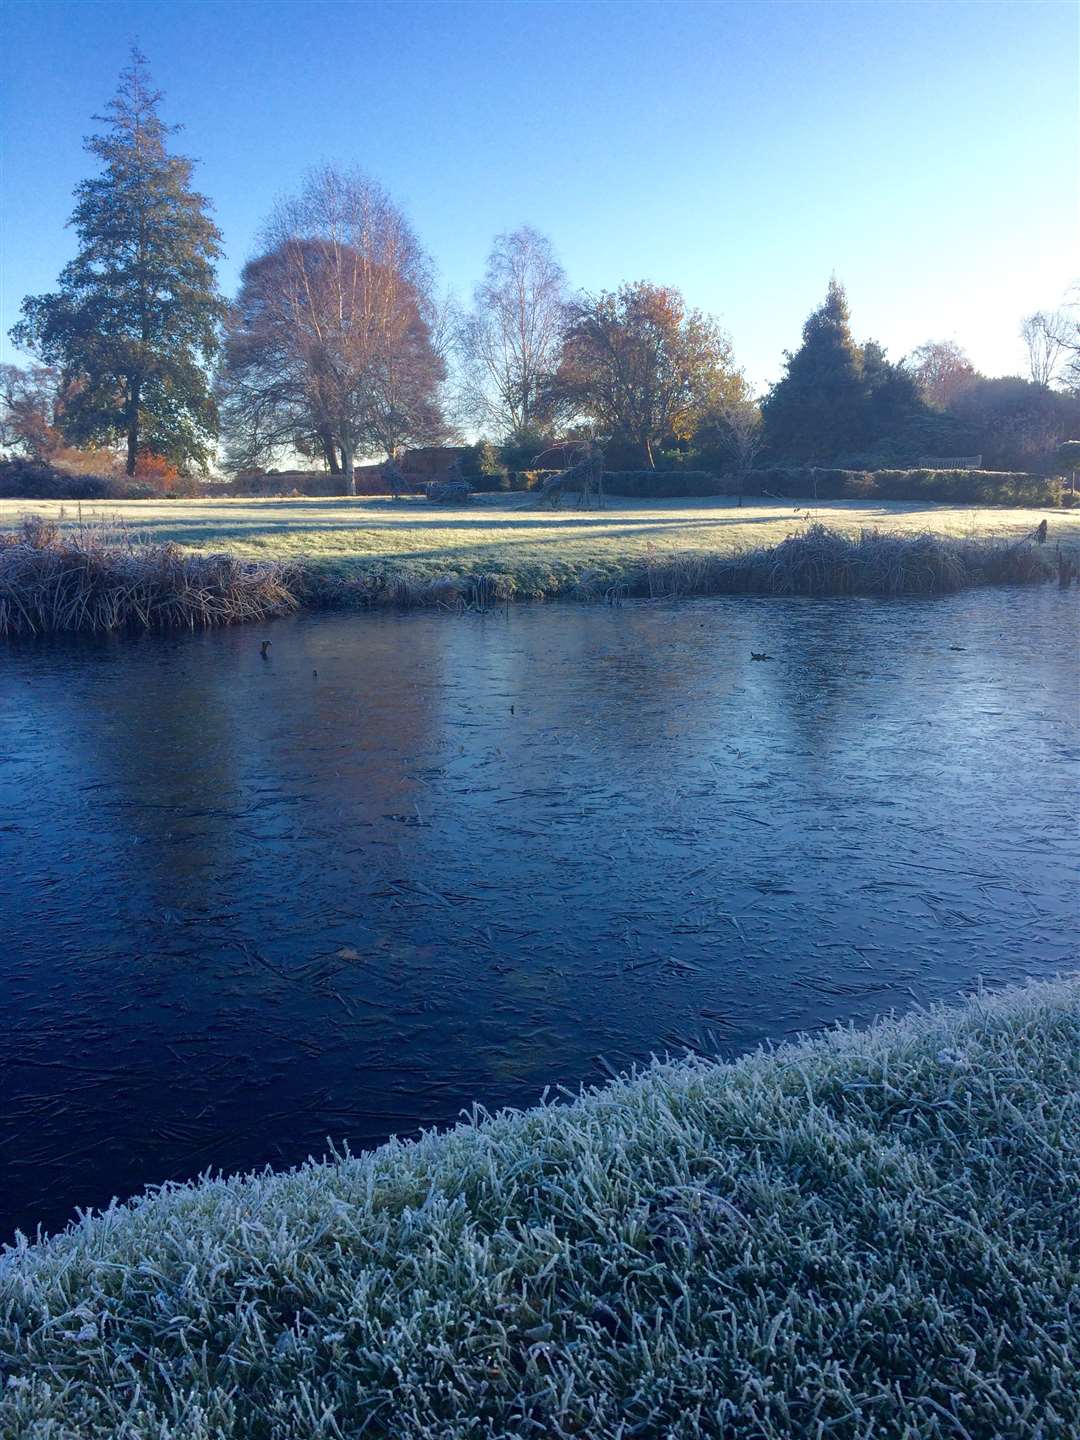 The outer moat is frozen over